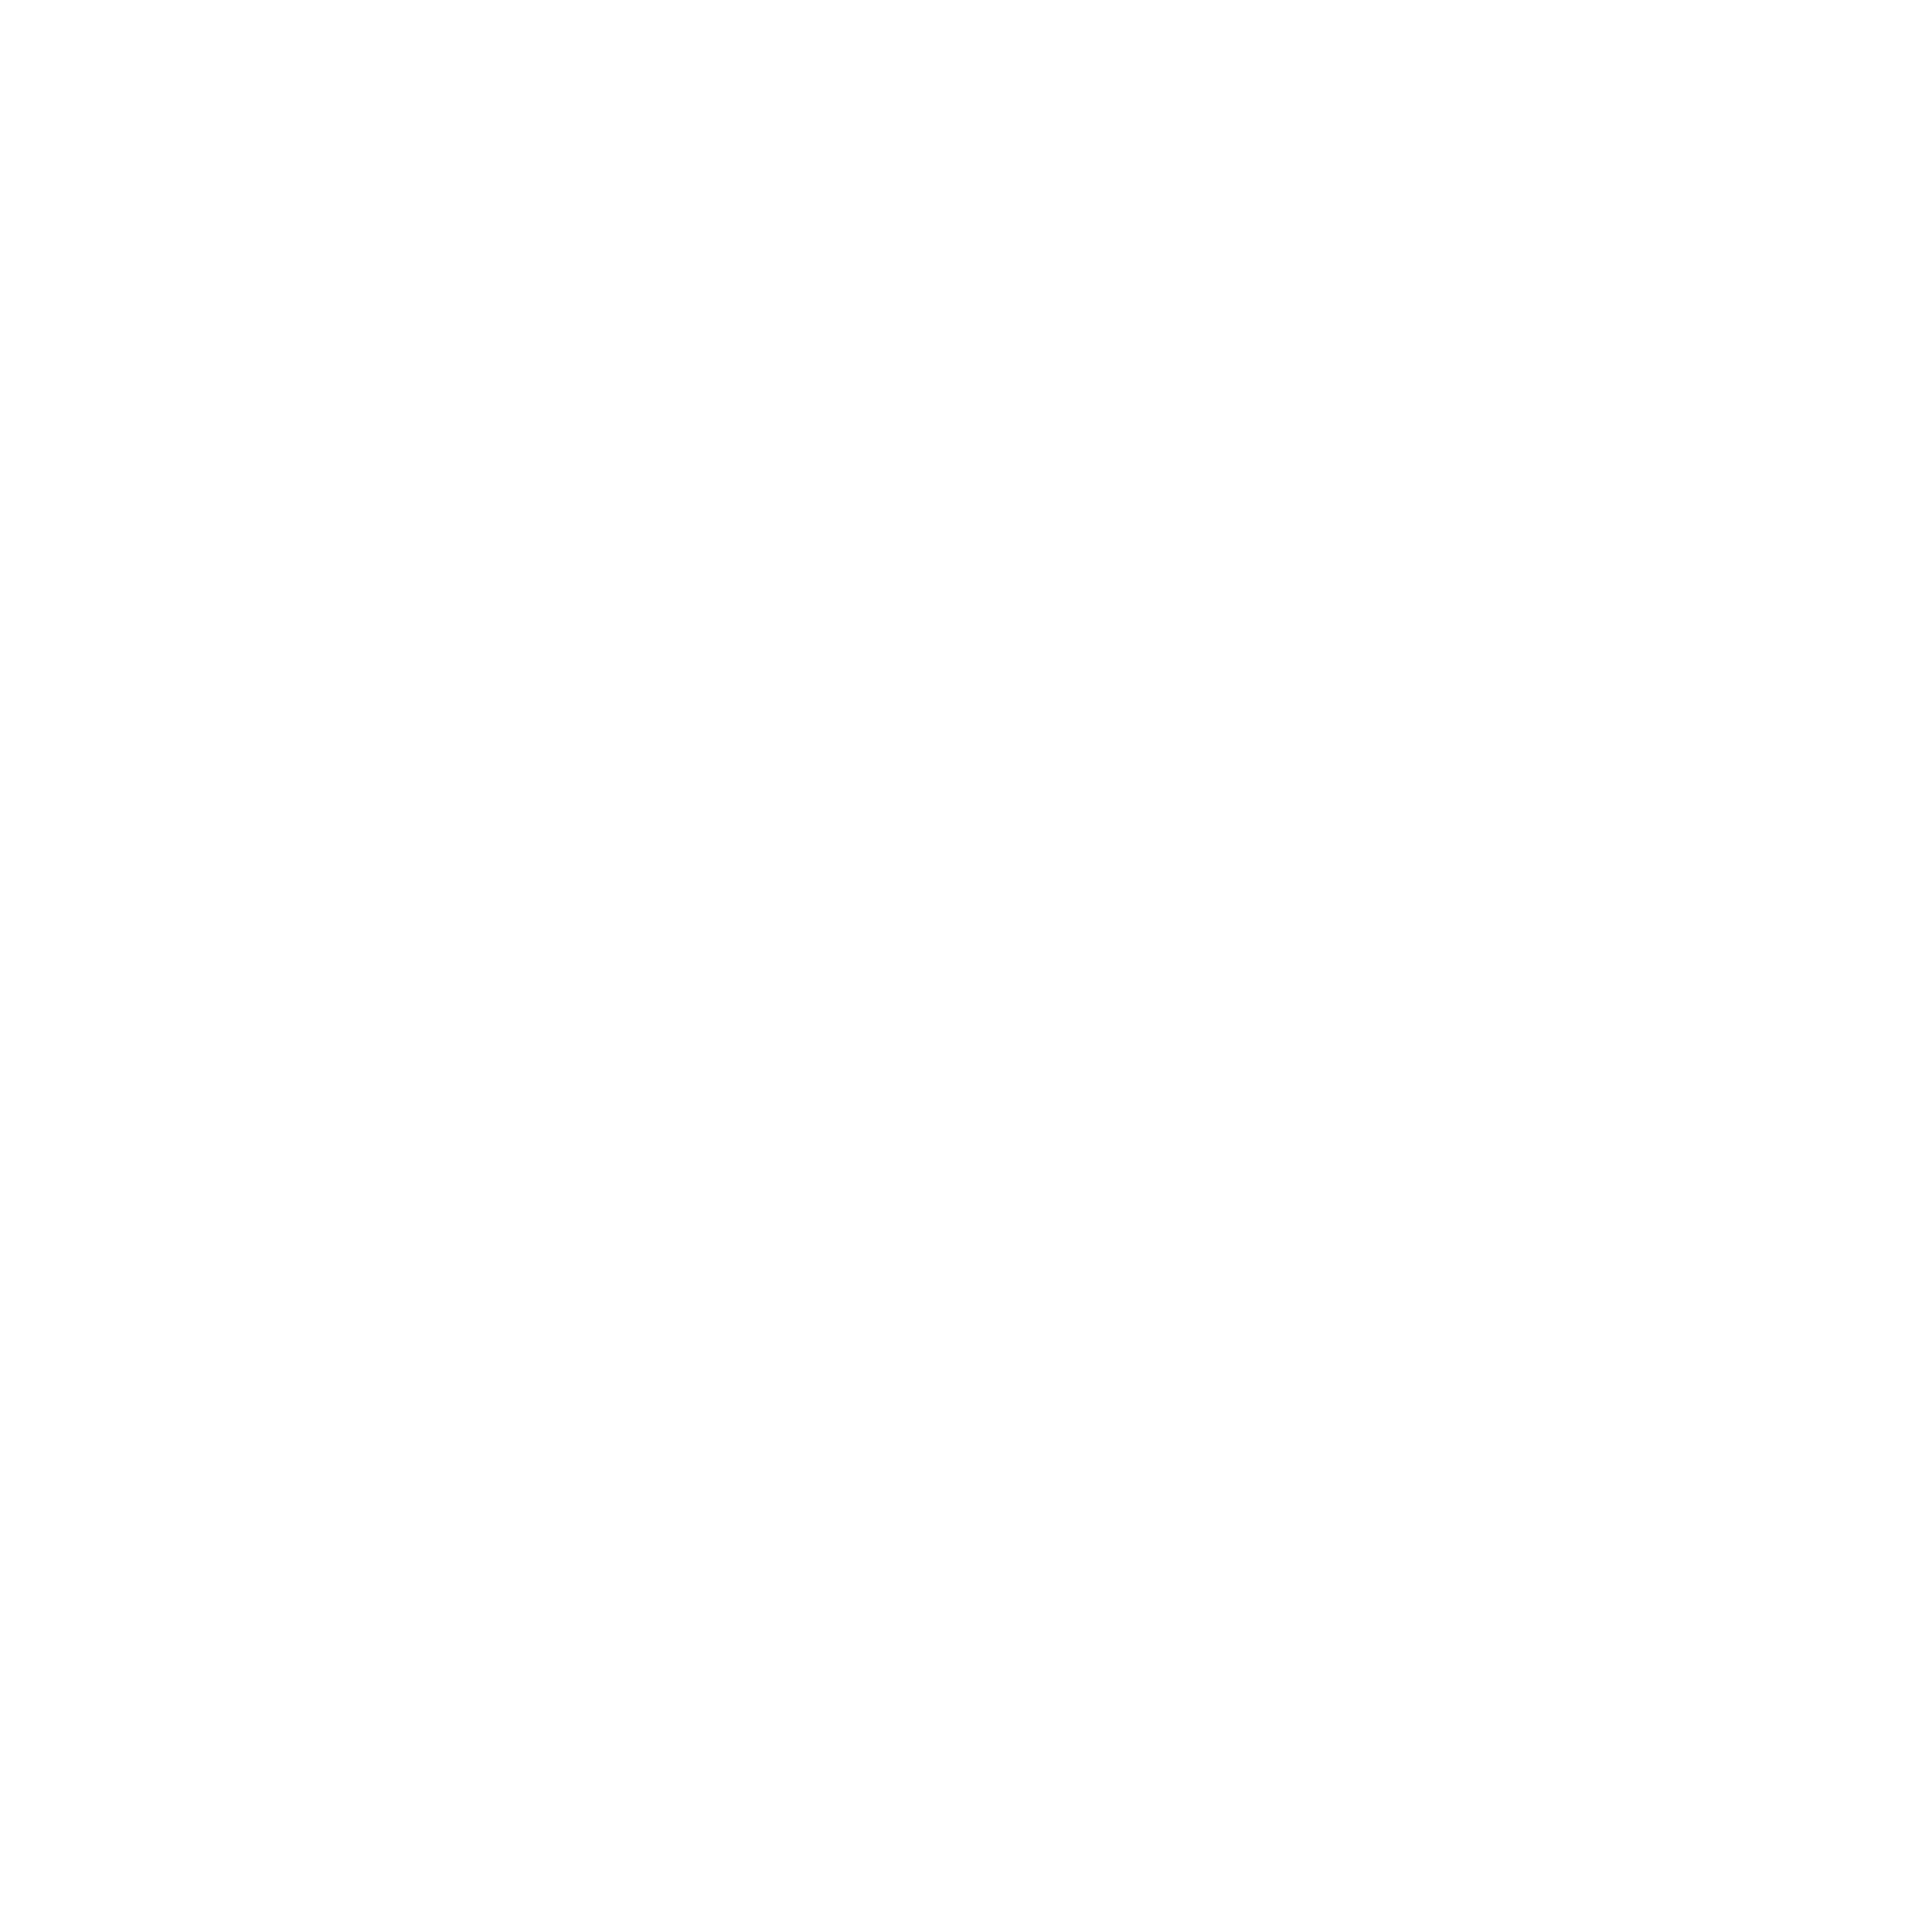 THE MOUTH OF GOD